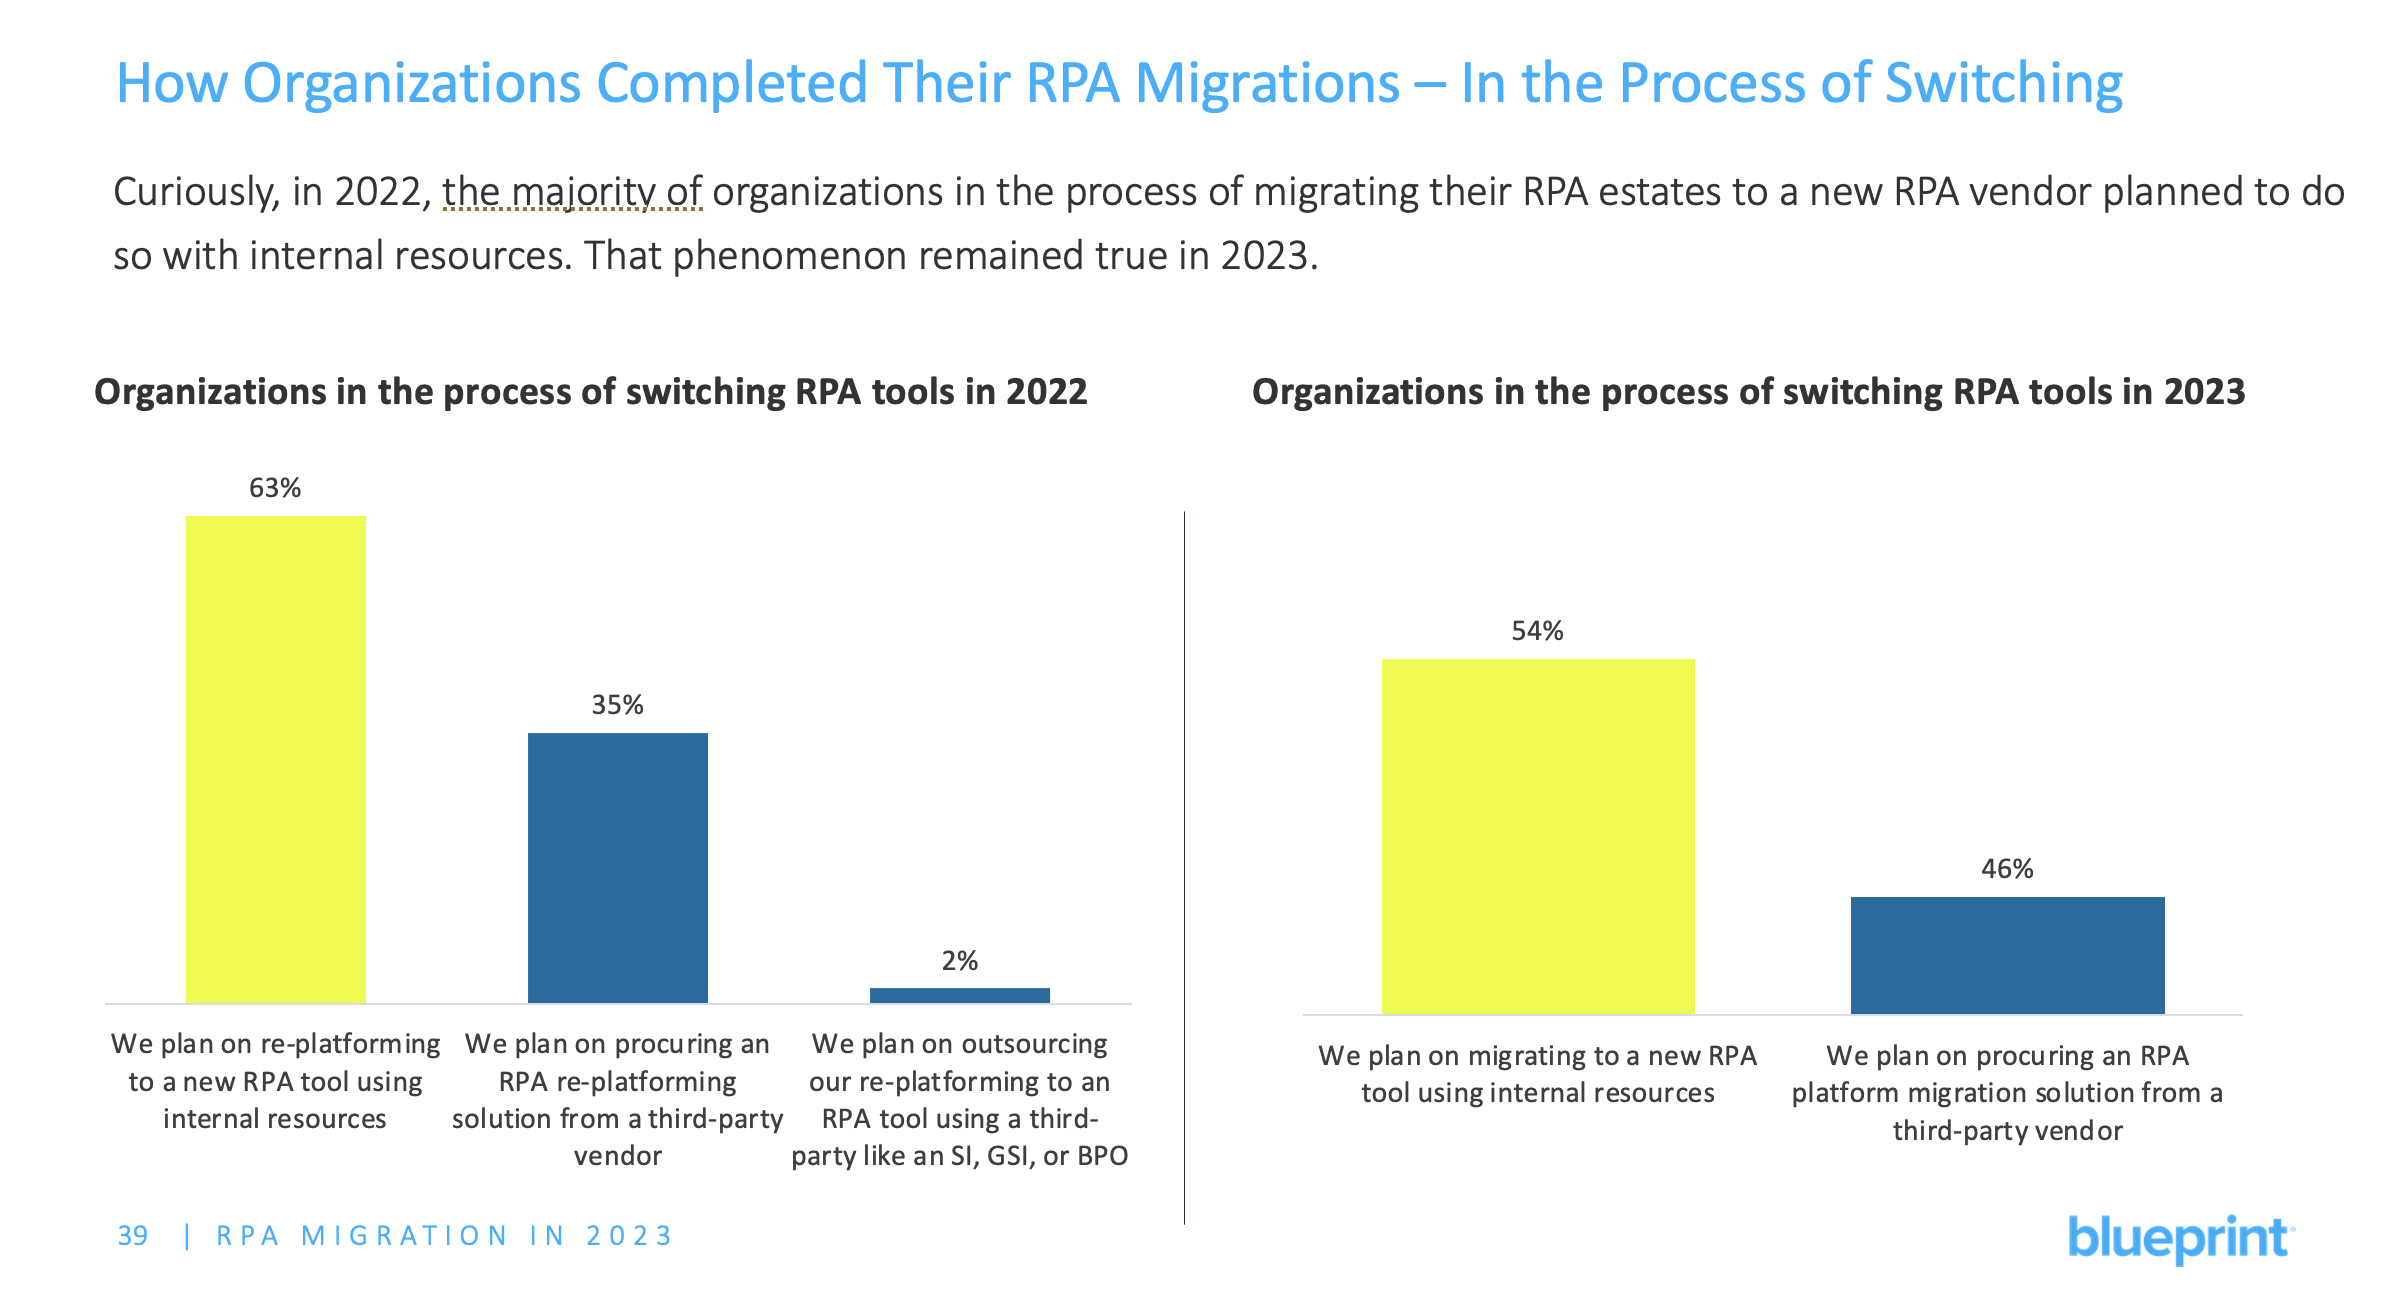 Companies-In-The-Process-of-RPA-Migration-Manual-RPA-Migration